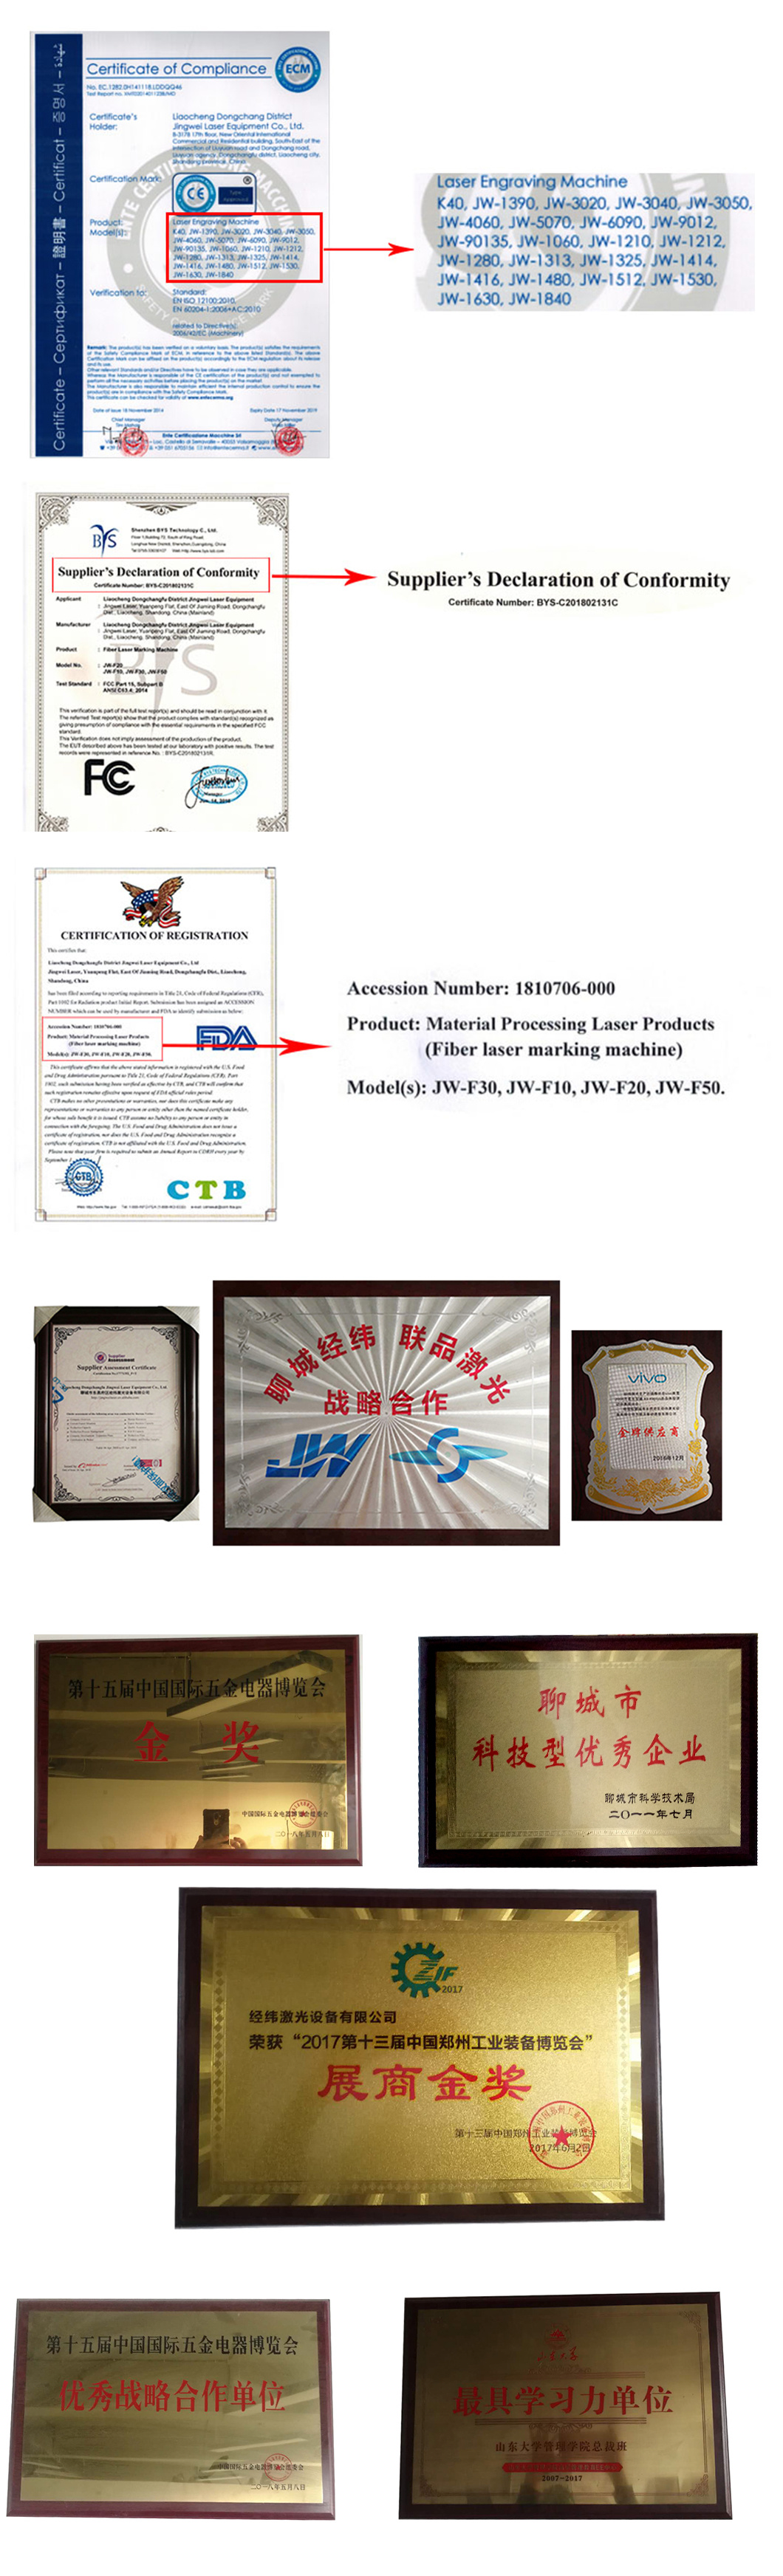 Bamboo Products/Wood/Acrylic/Leather/Glass/Building Ceramics/Rubber/Gobo Projector Fiber Laser Marking Equipment